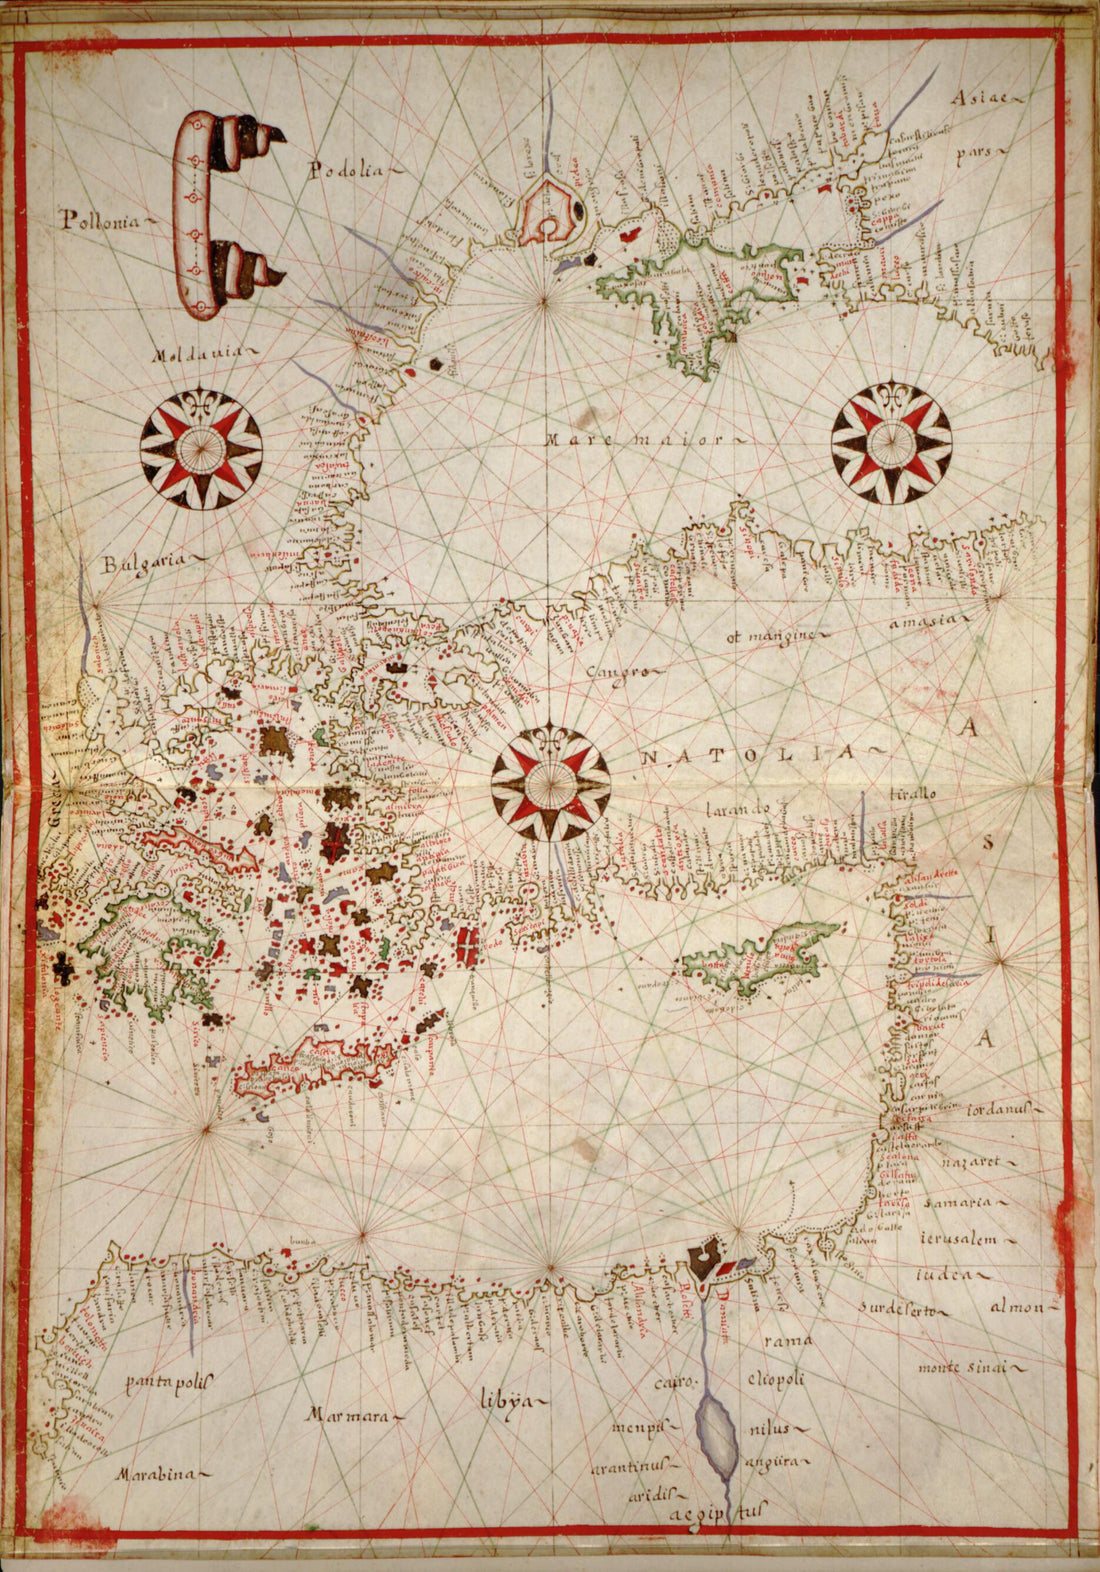 This old map of Portolan Atlas of the Mediterranean Sea, Western Europe, and the Northwest Coast of Africa from 1590 was created by Joan Oliva in 1590